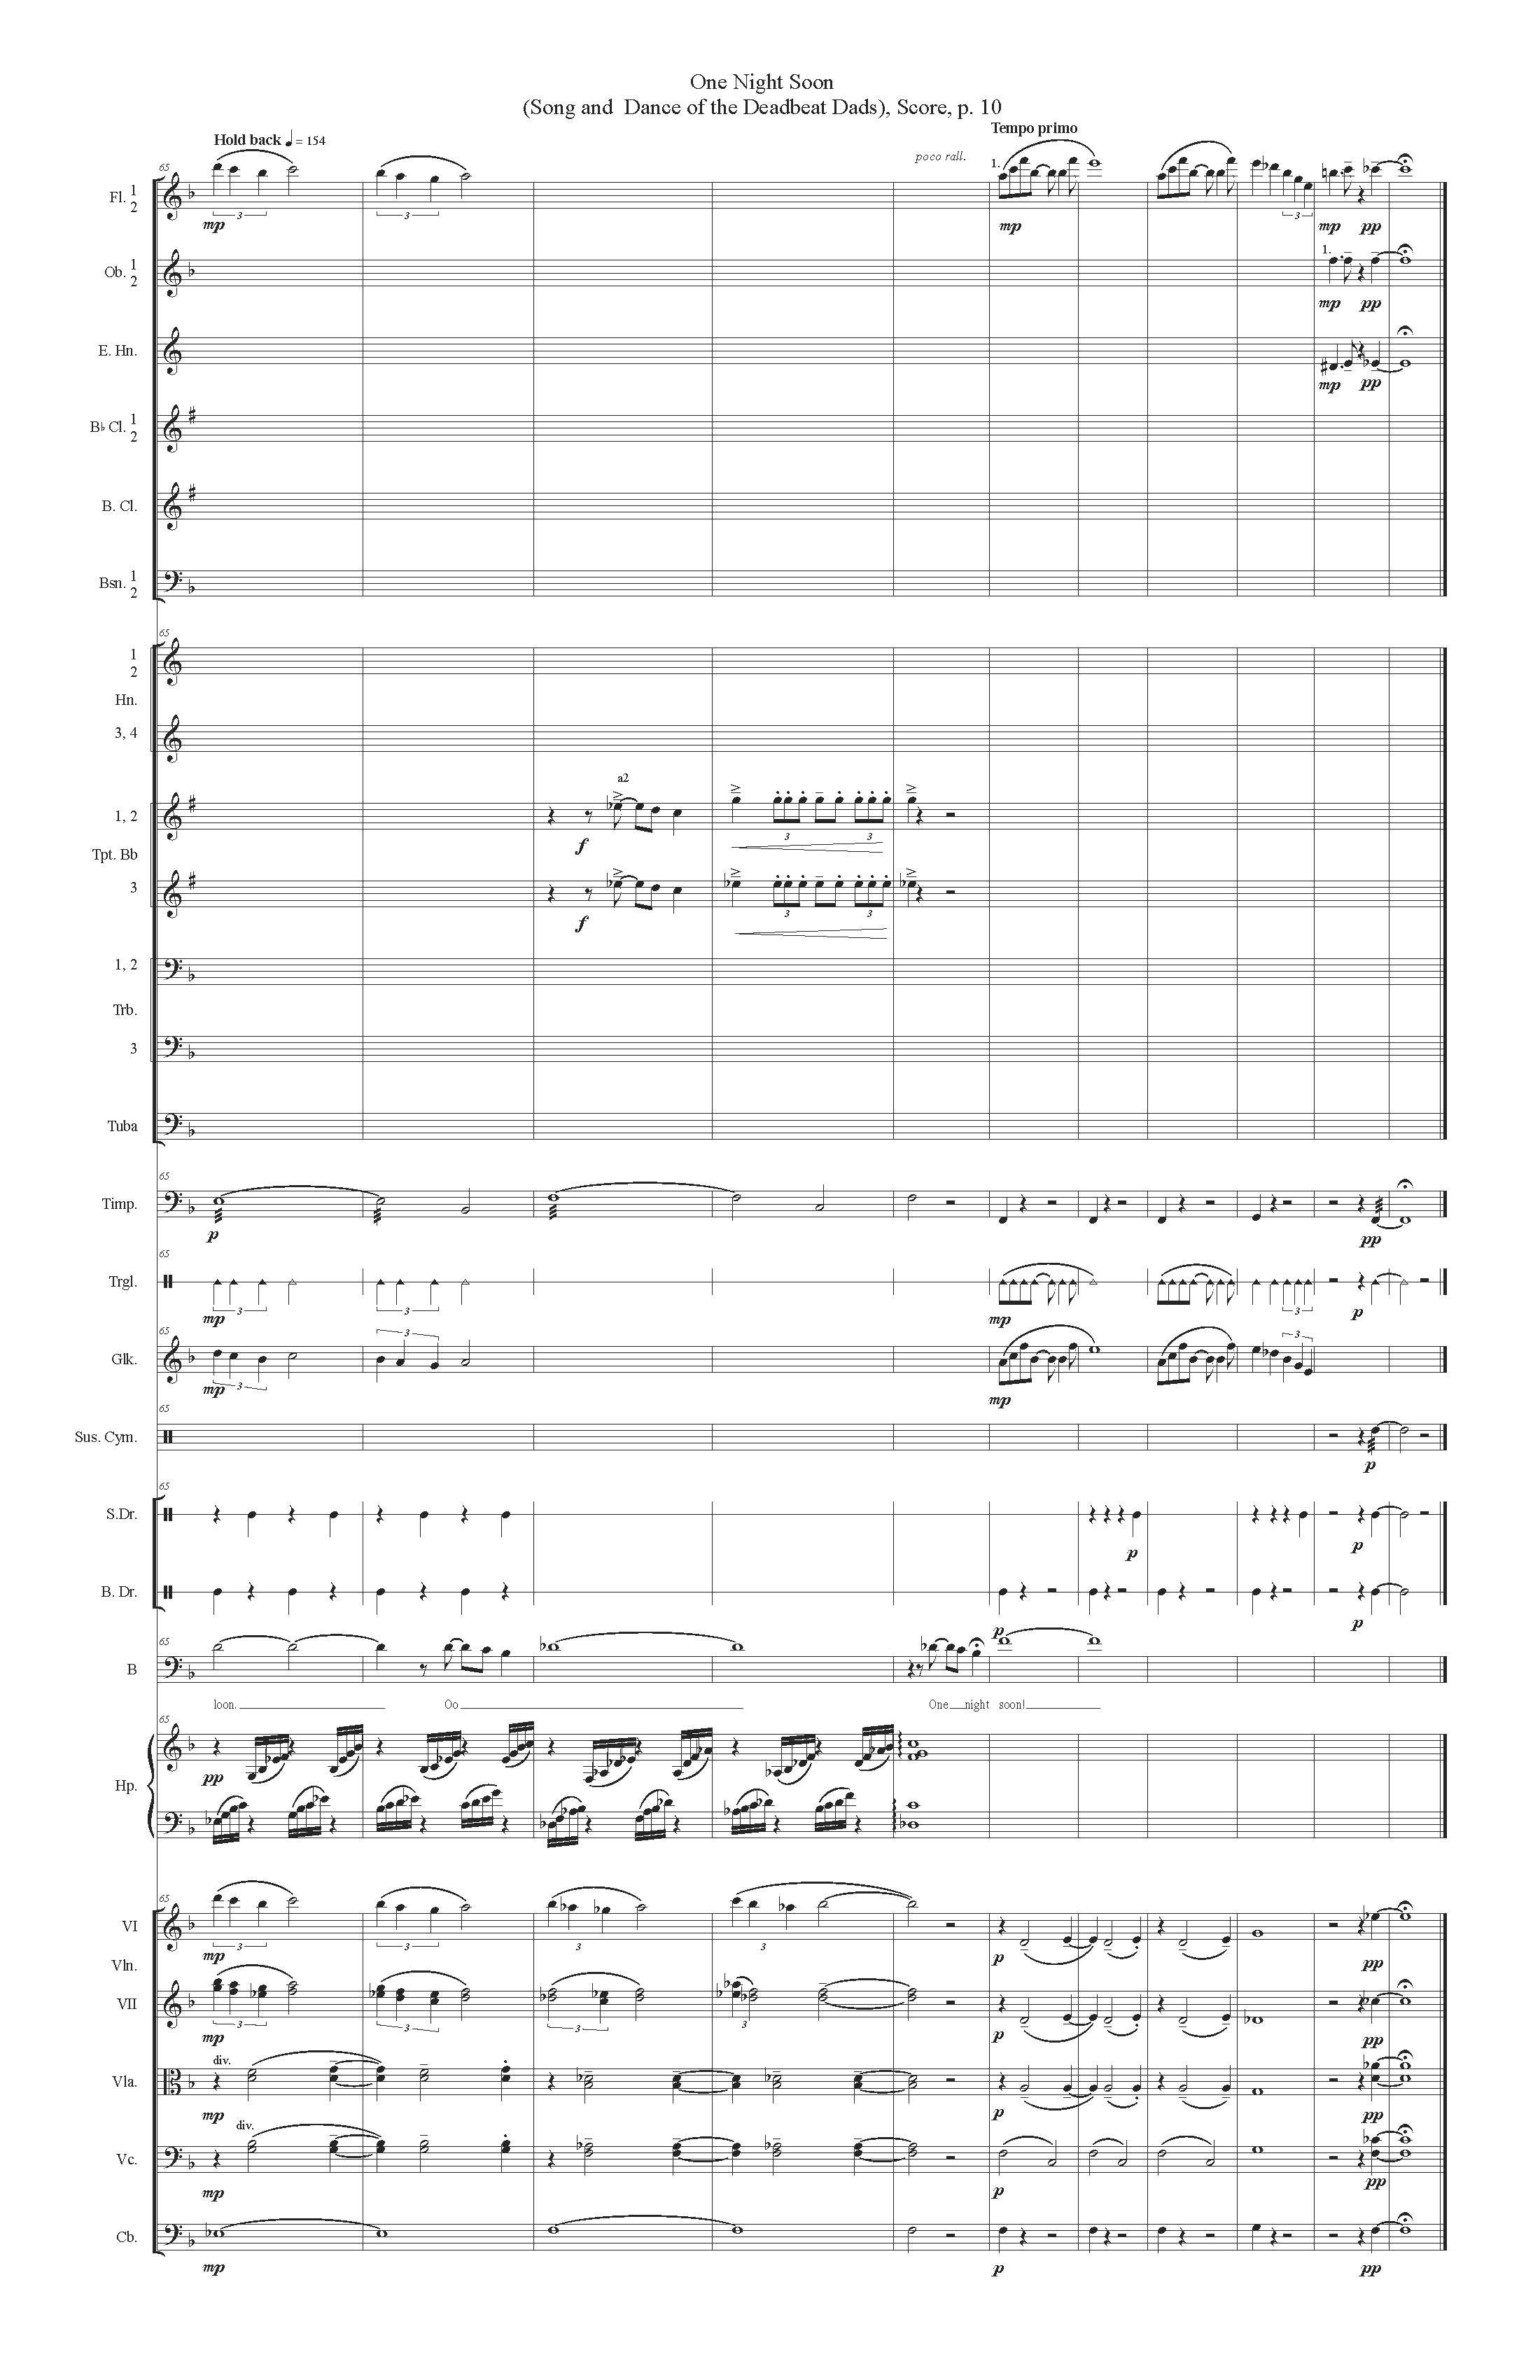 ONE NIGHT SOON ORCH - Score_Page_10.jpg